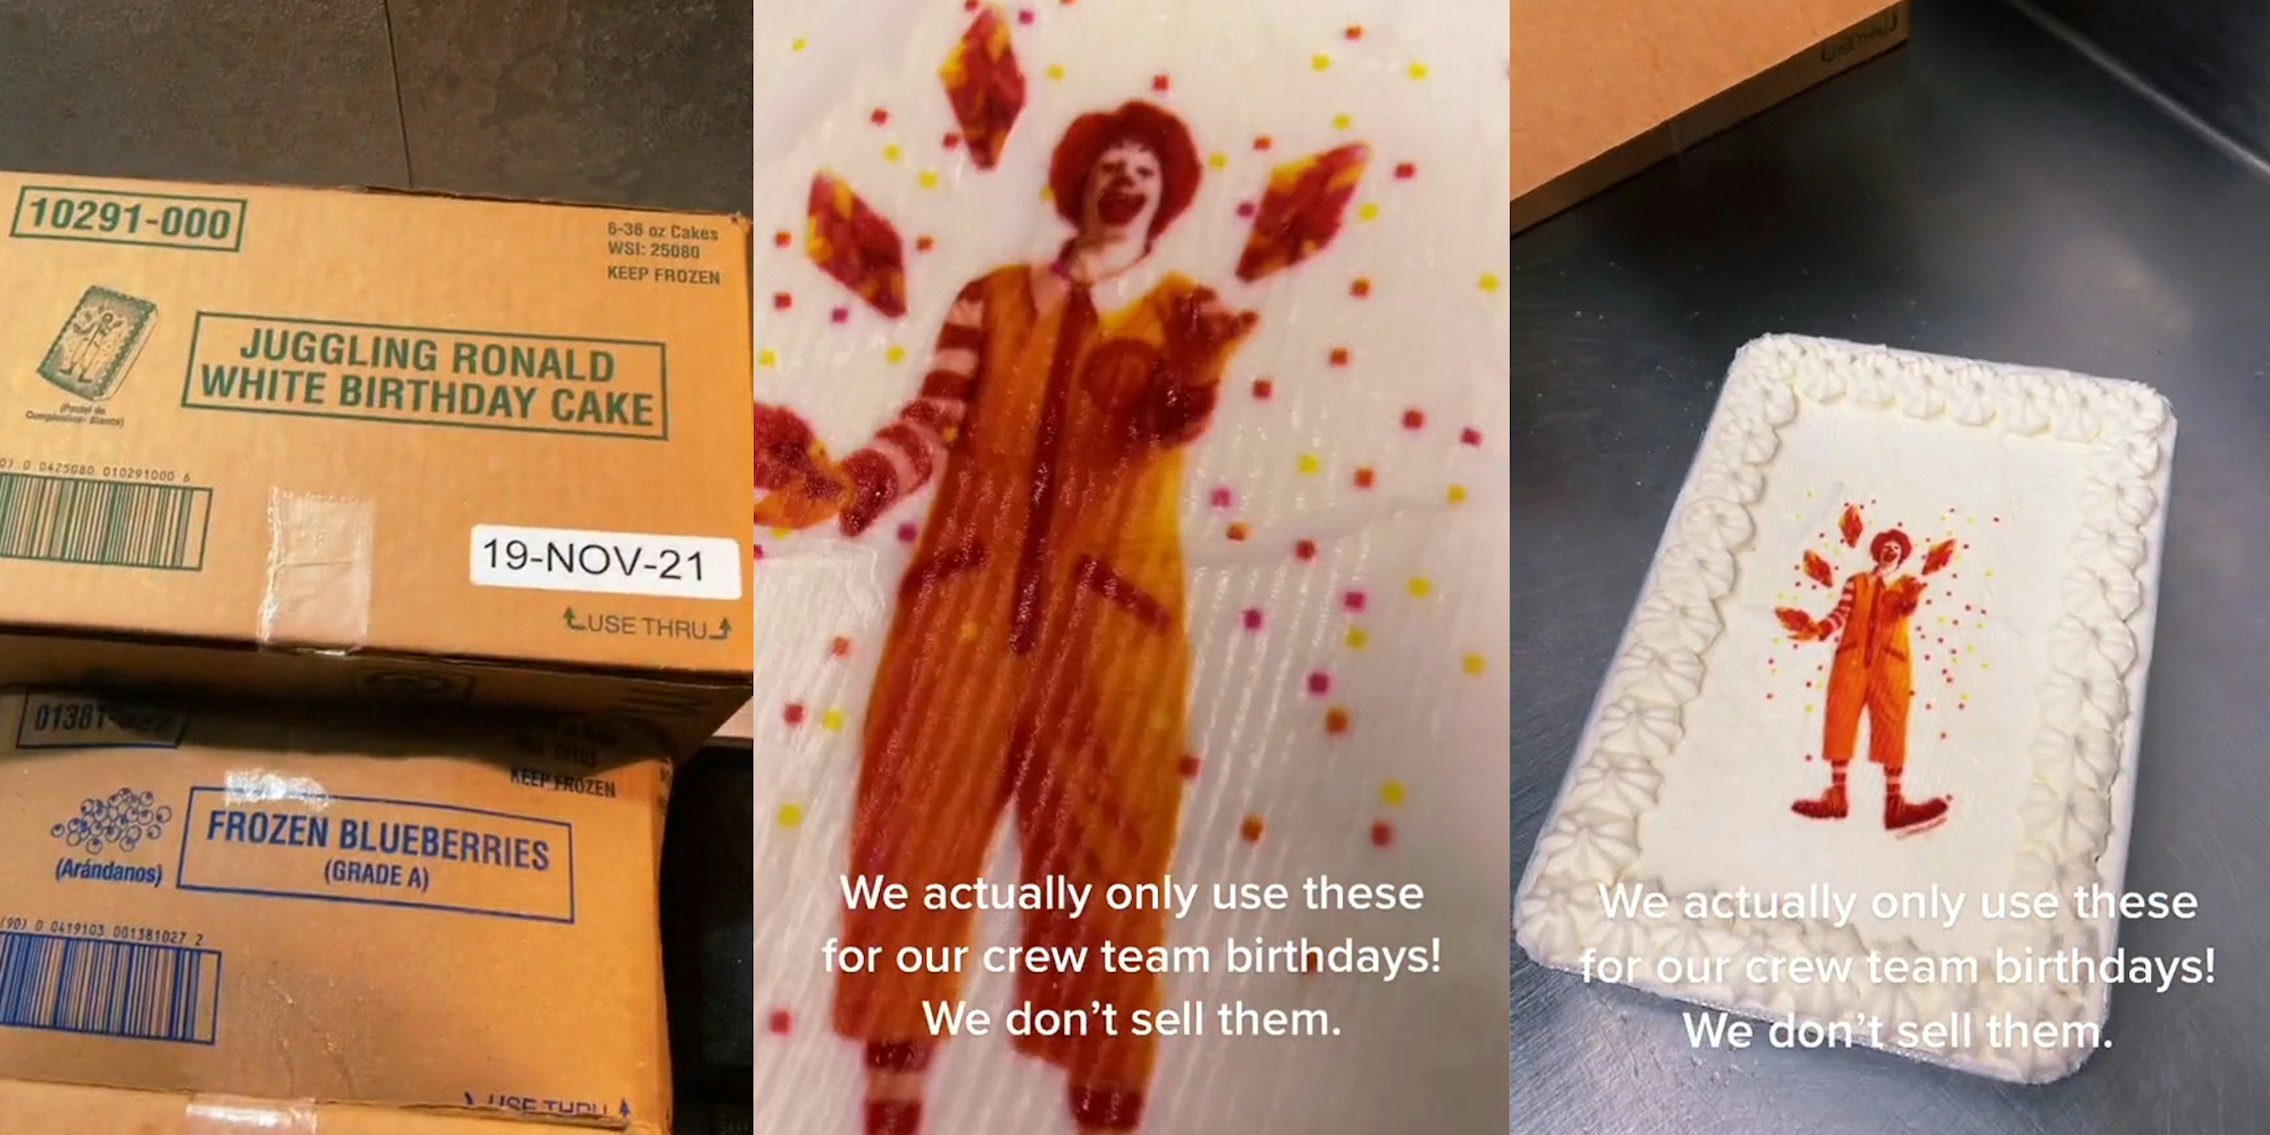 McDonald's worker shows off Ronald McDonald birthday cake used for employees.